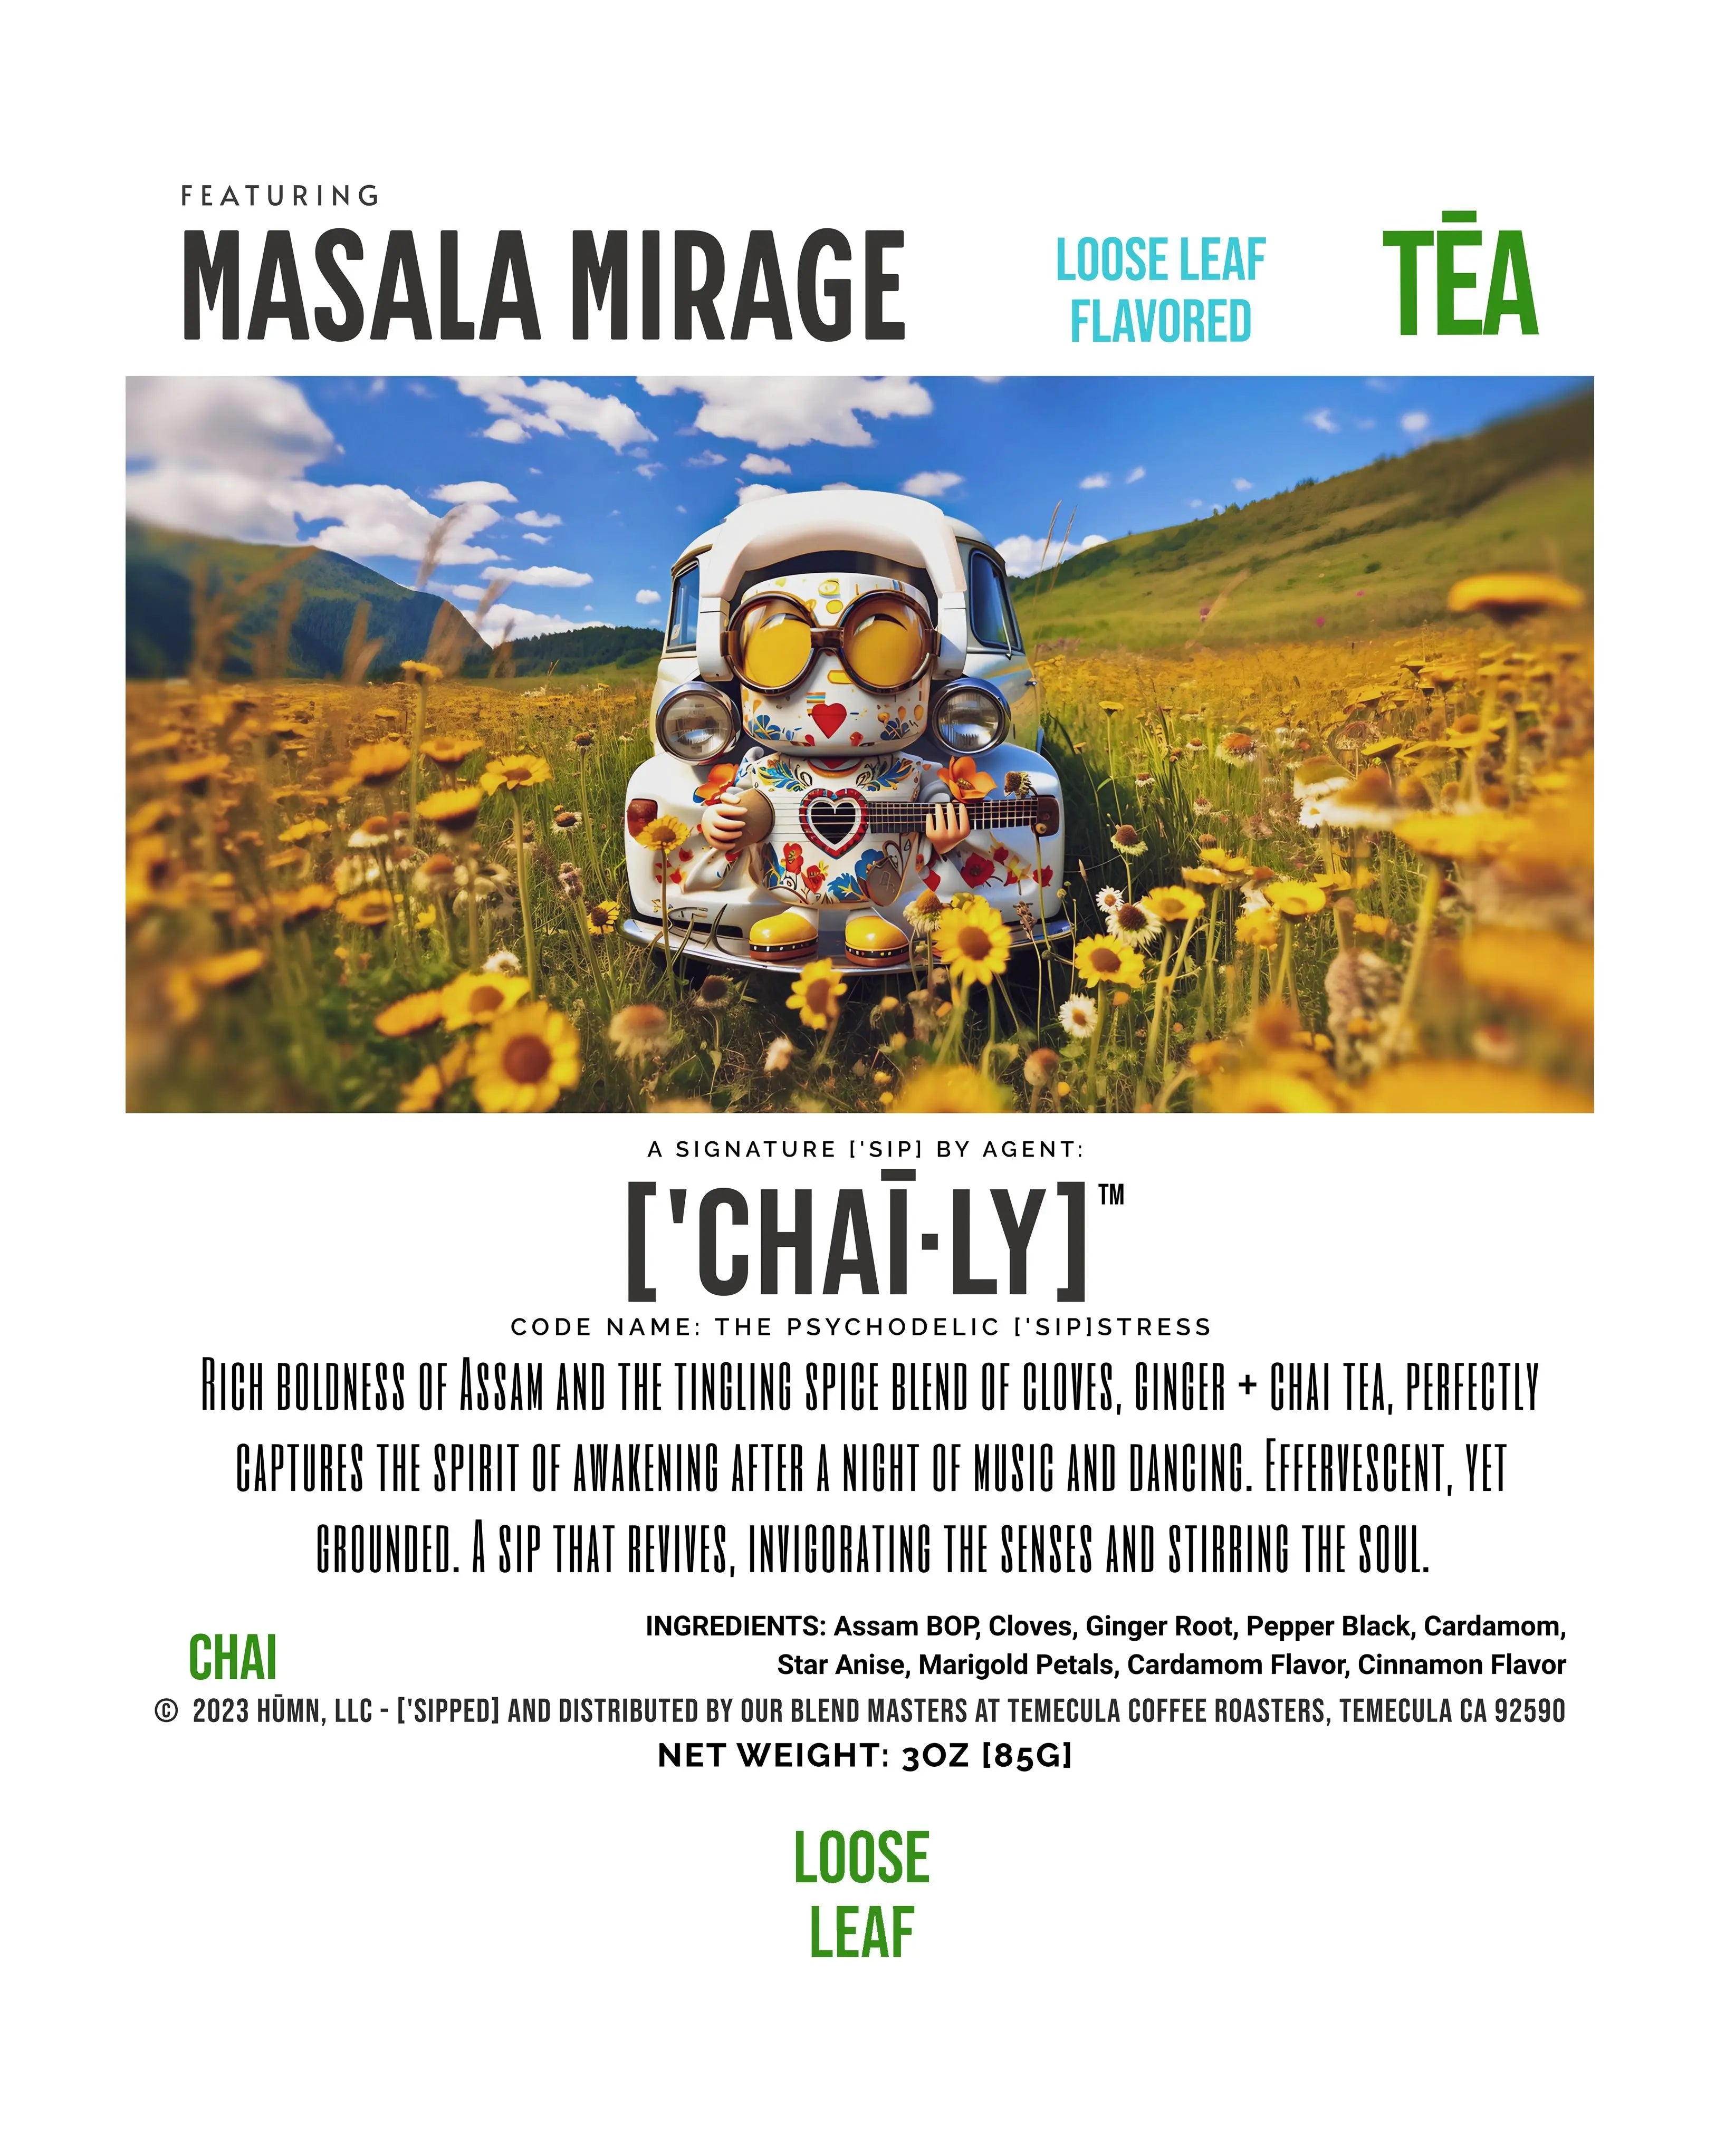 Spiced Masala Chai Mirage Sippers Tea by Chaily